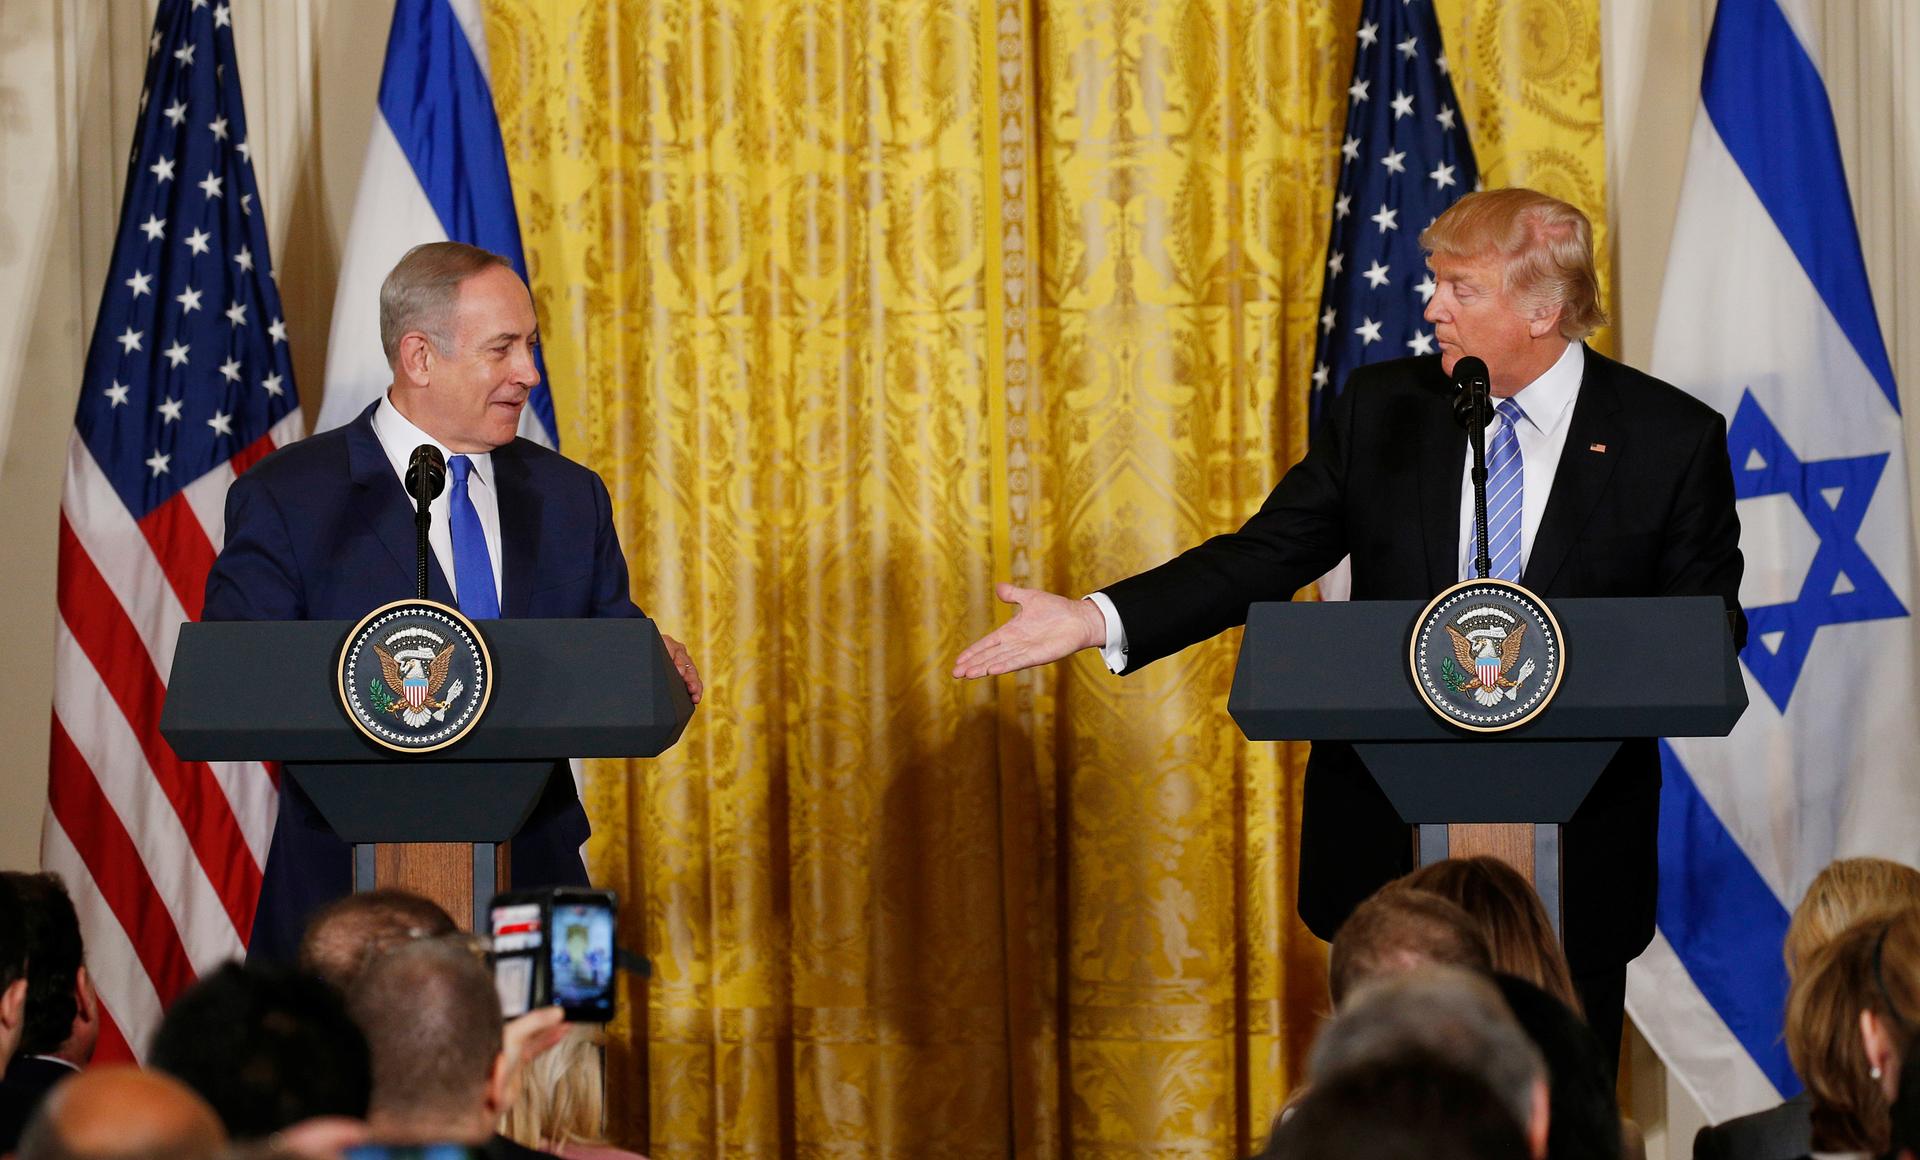 US President Donald Trump (right) reaches to greet Israeli Prime Minister Benjamin Netanyahu after a joint news conference at the White House in Washington, DC, on February 15, 2017. 